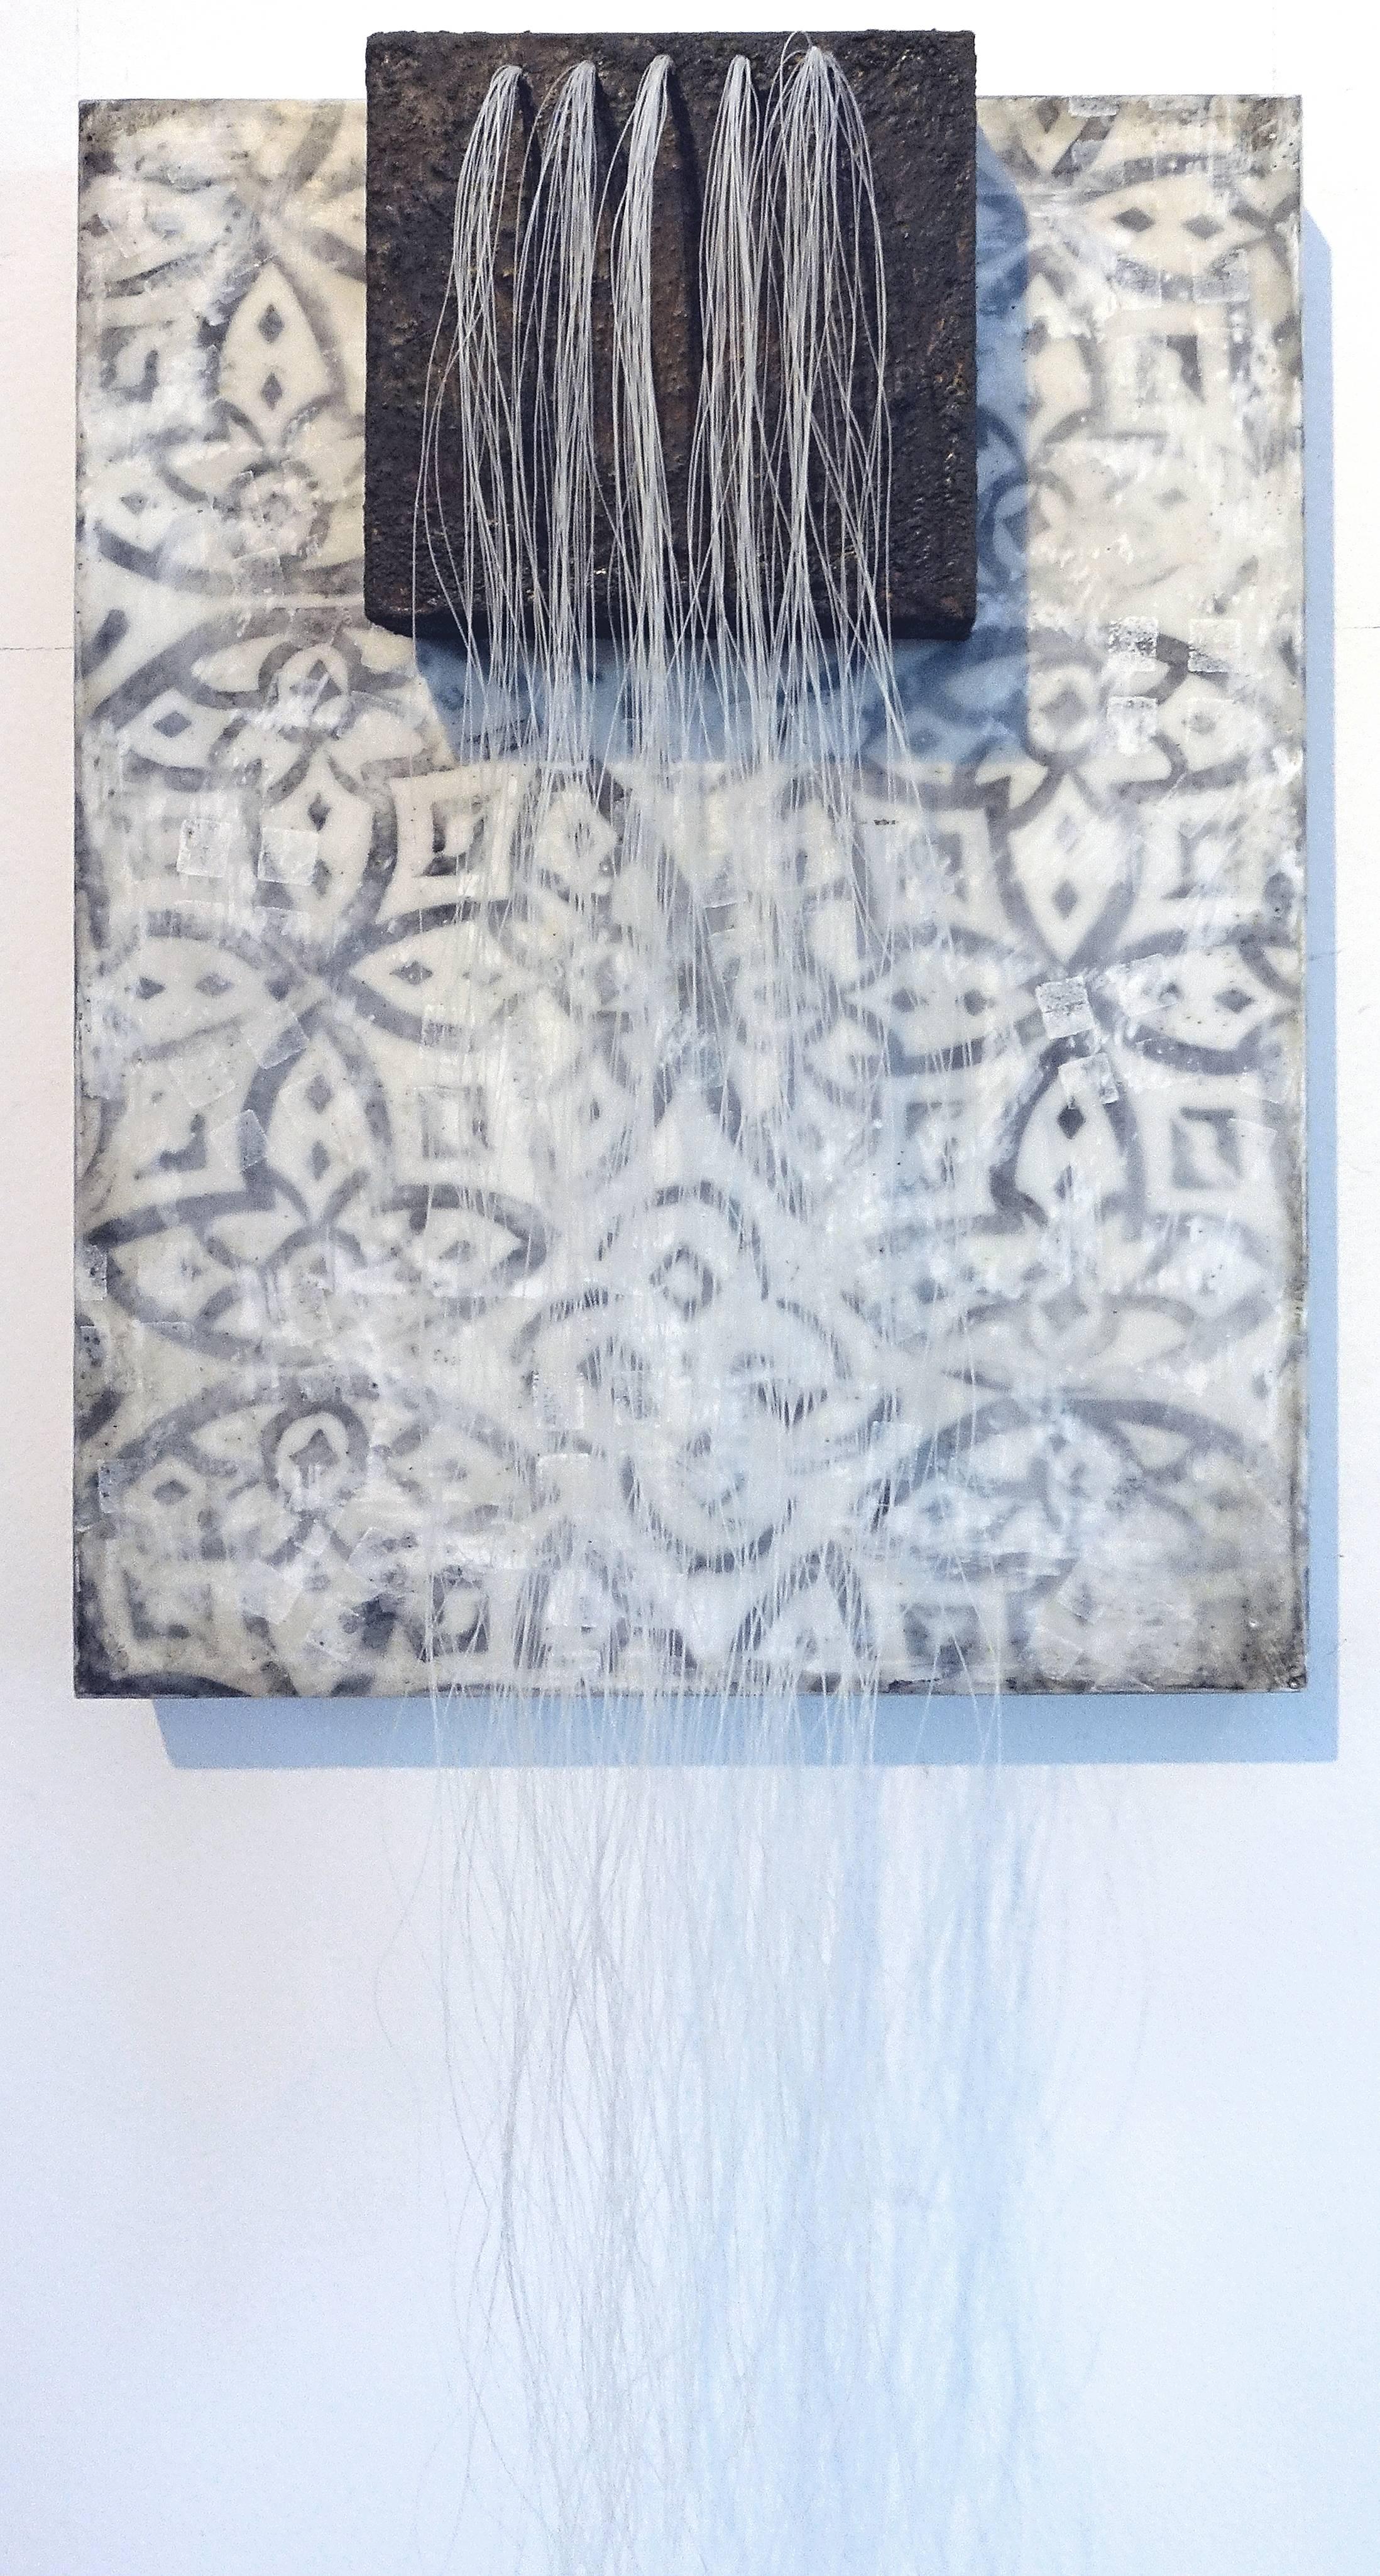 Hairfall (Mixed Media Abstract Wall Sculpture with Grey & White Mosaic Pattern) - Mixed Media Art by Susan Stover